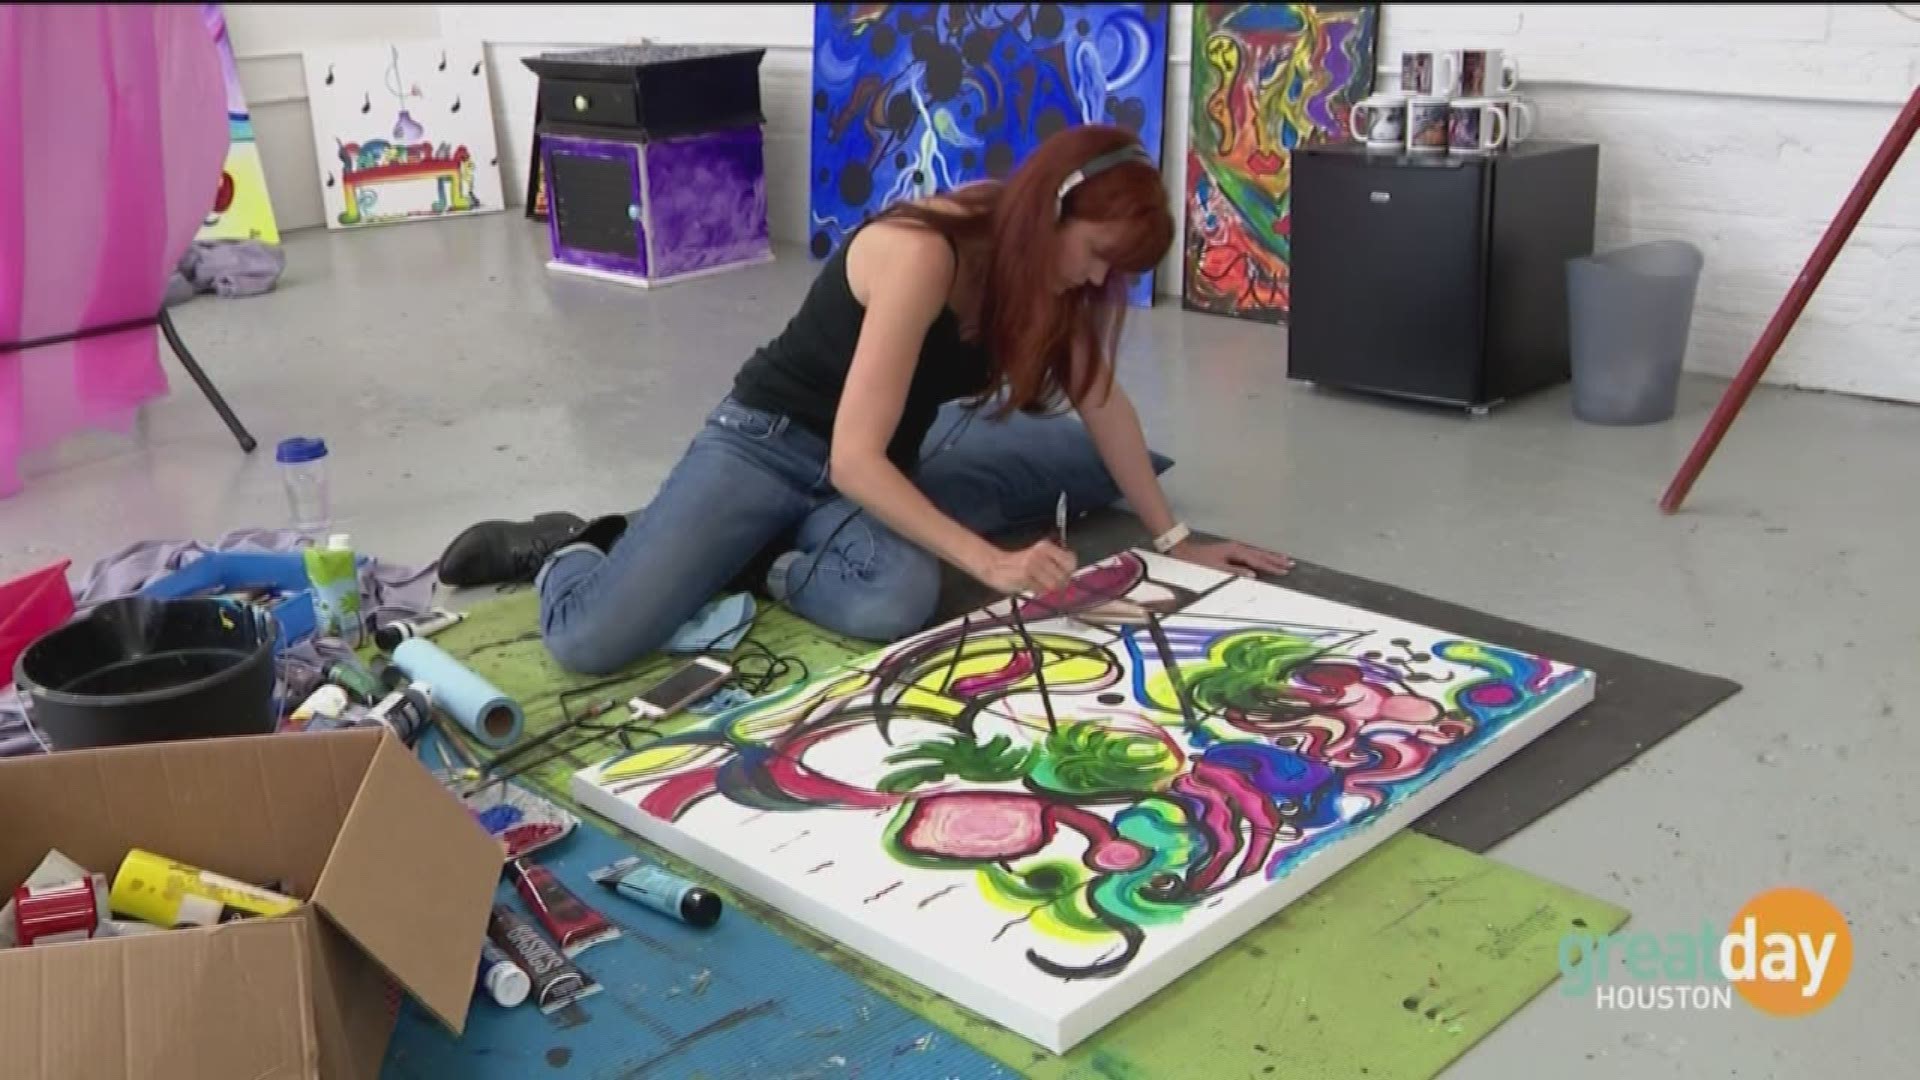 Beauty is in the eye of the beholder, but for one local artist beauty is in the sound coming from her headphones.  Great Day Houston's Cristina Kooker met up with an artist at the Winter Street Studios who paints the sight of sound.